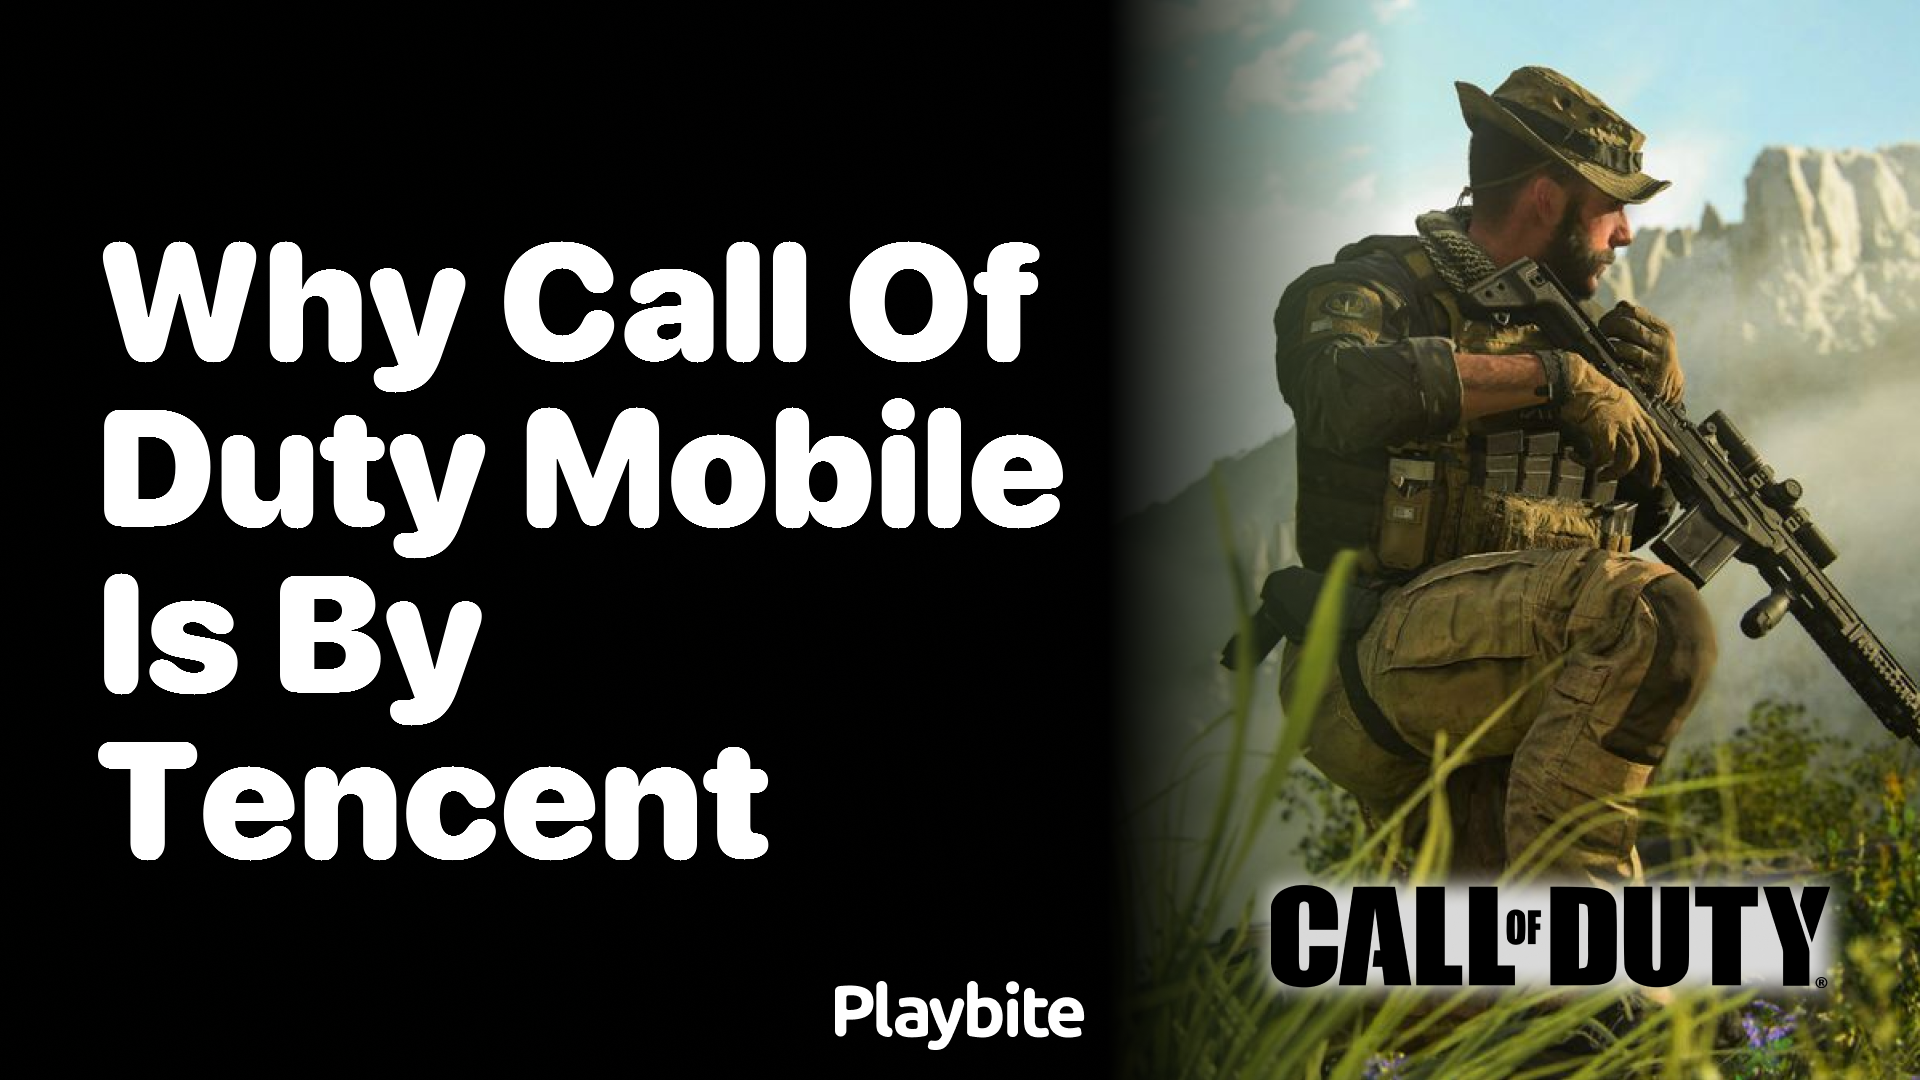 Why Is Call of Duty Mobile Created by Tencent?